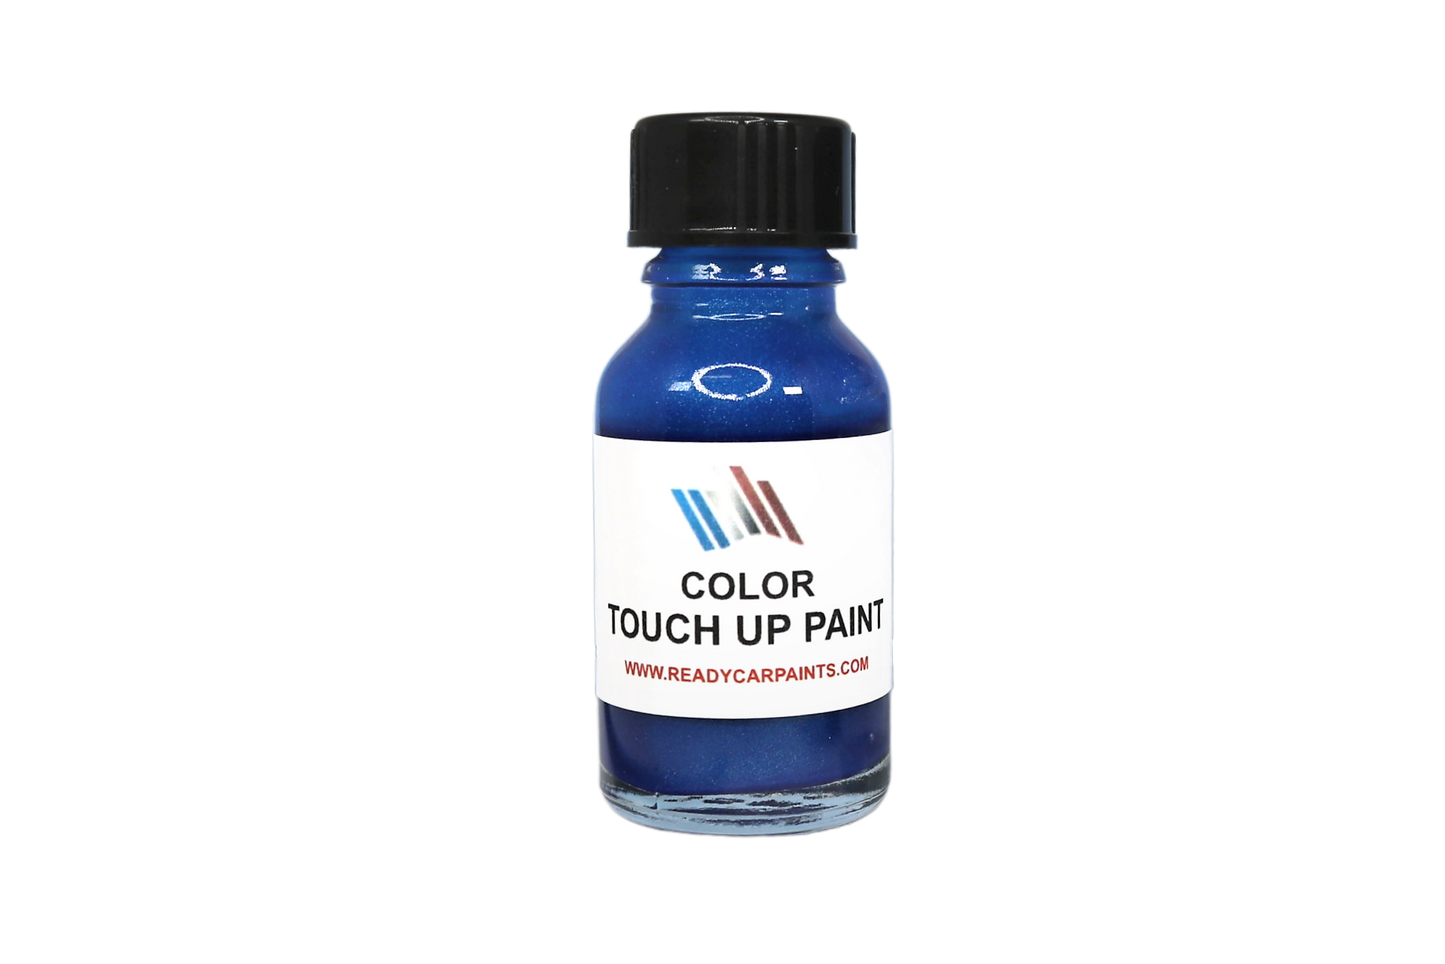 HYUNDAI PAB Royal Blue Pearl Touch Up Paint Kit 100% OEM Color Match